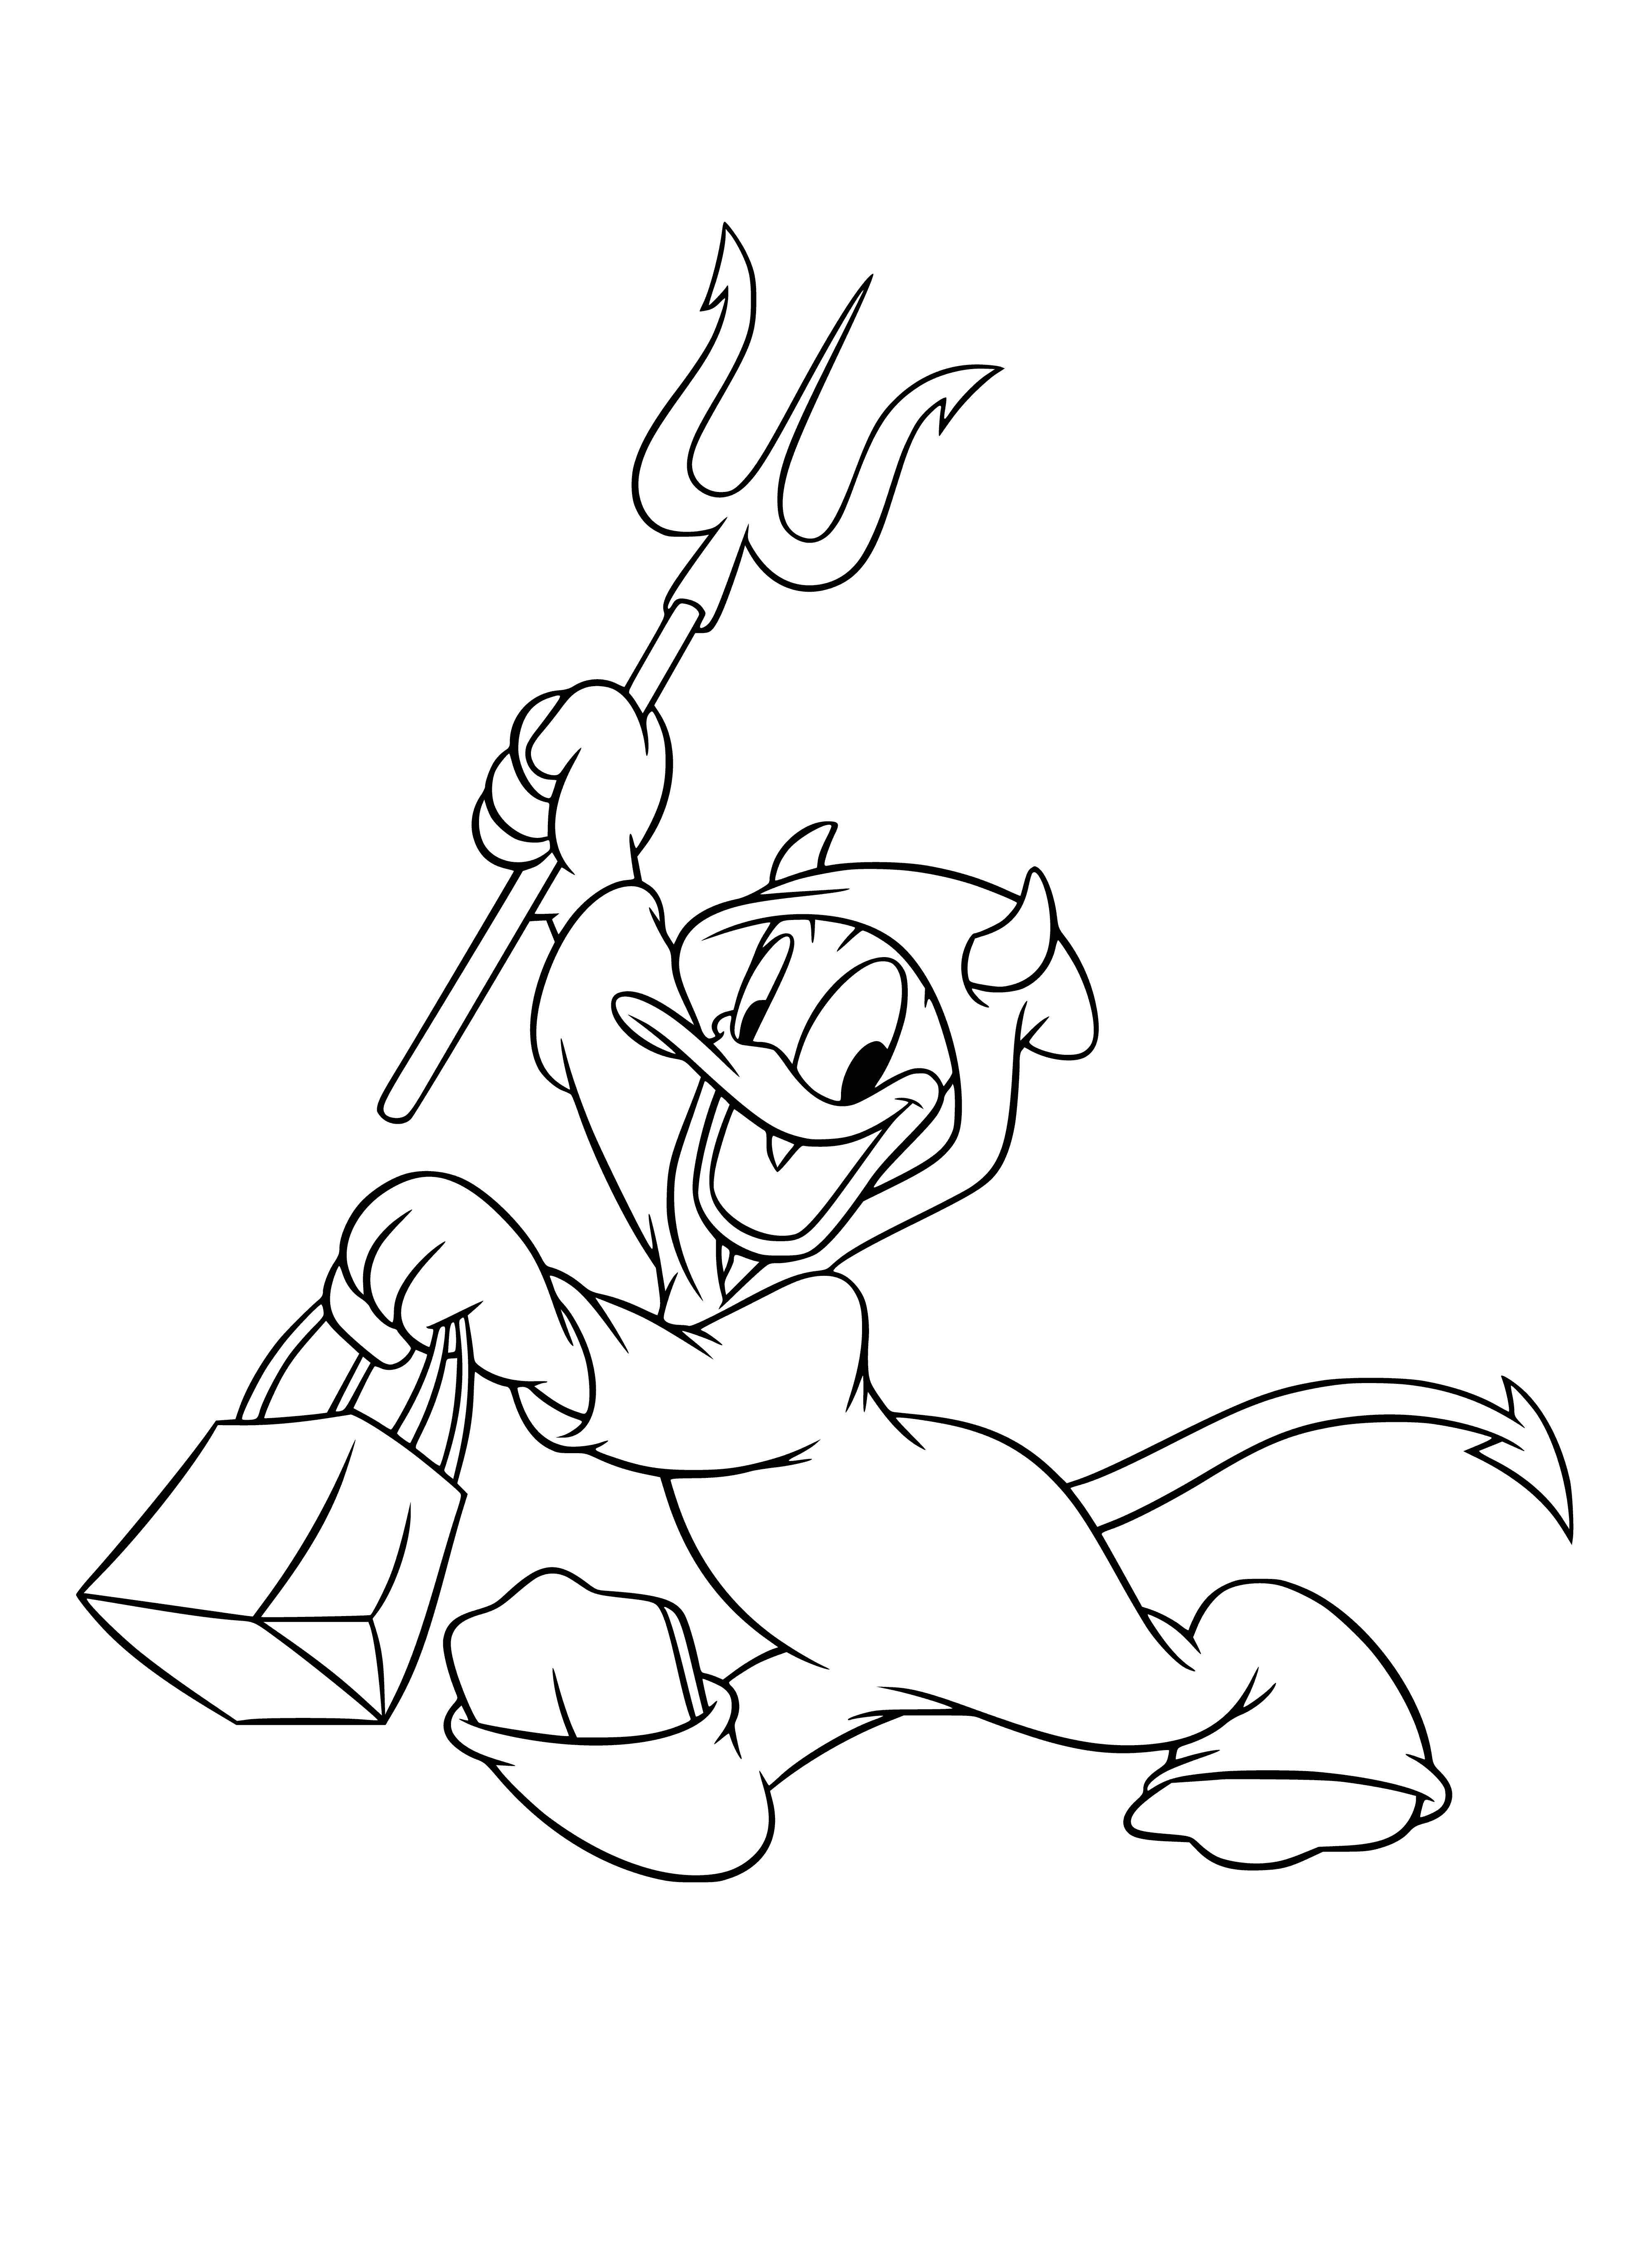 coloring page: Donald Duck is a pirate ready to trick-or-treat and collect treats from all the houses. Happy Halloween! #halloween #donaldduck